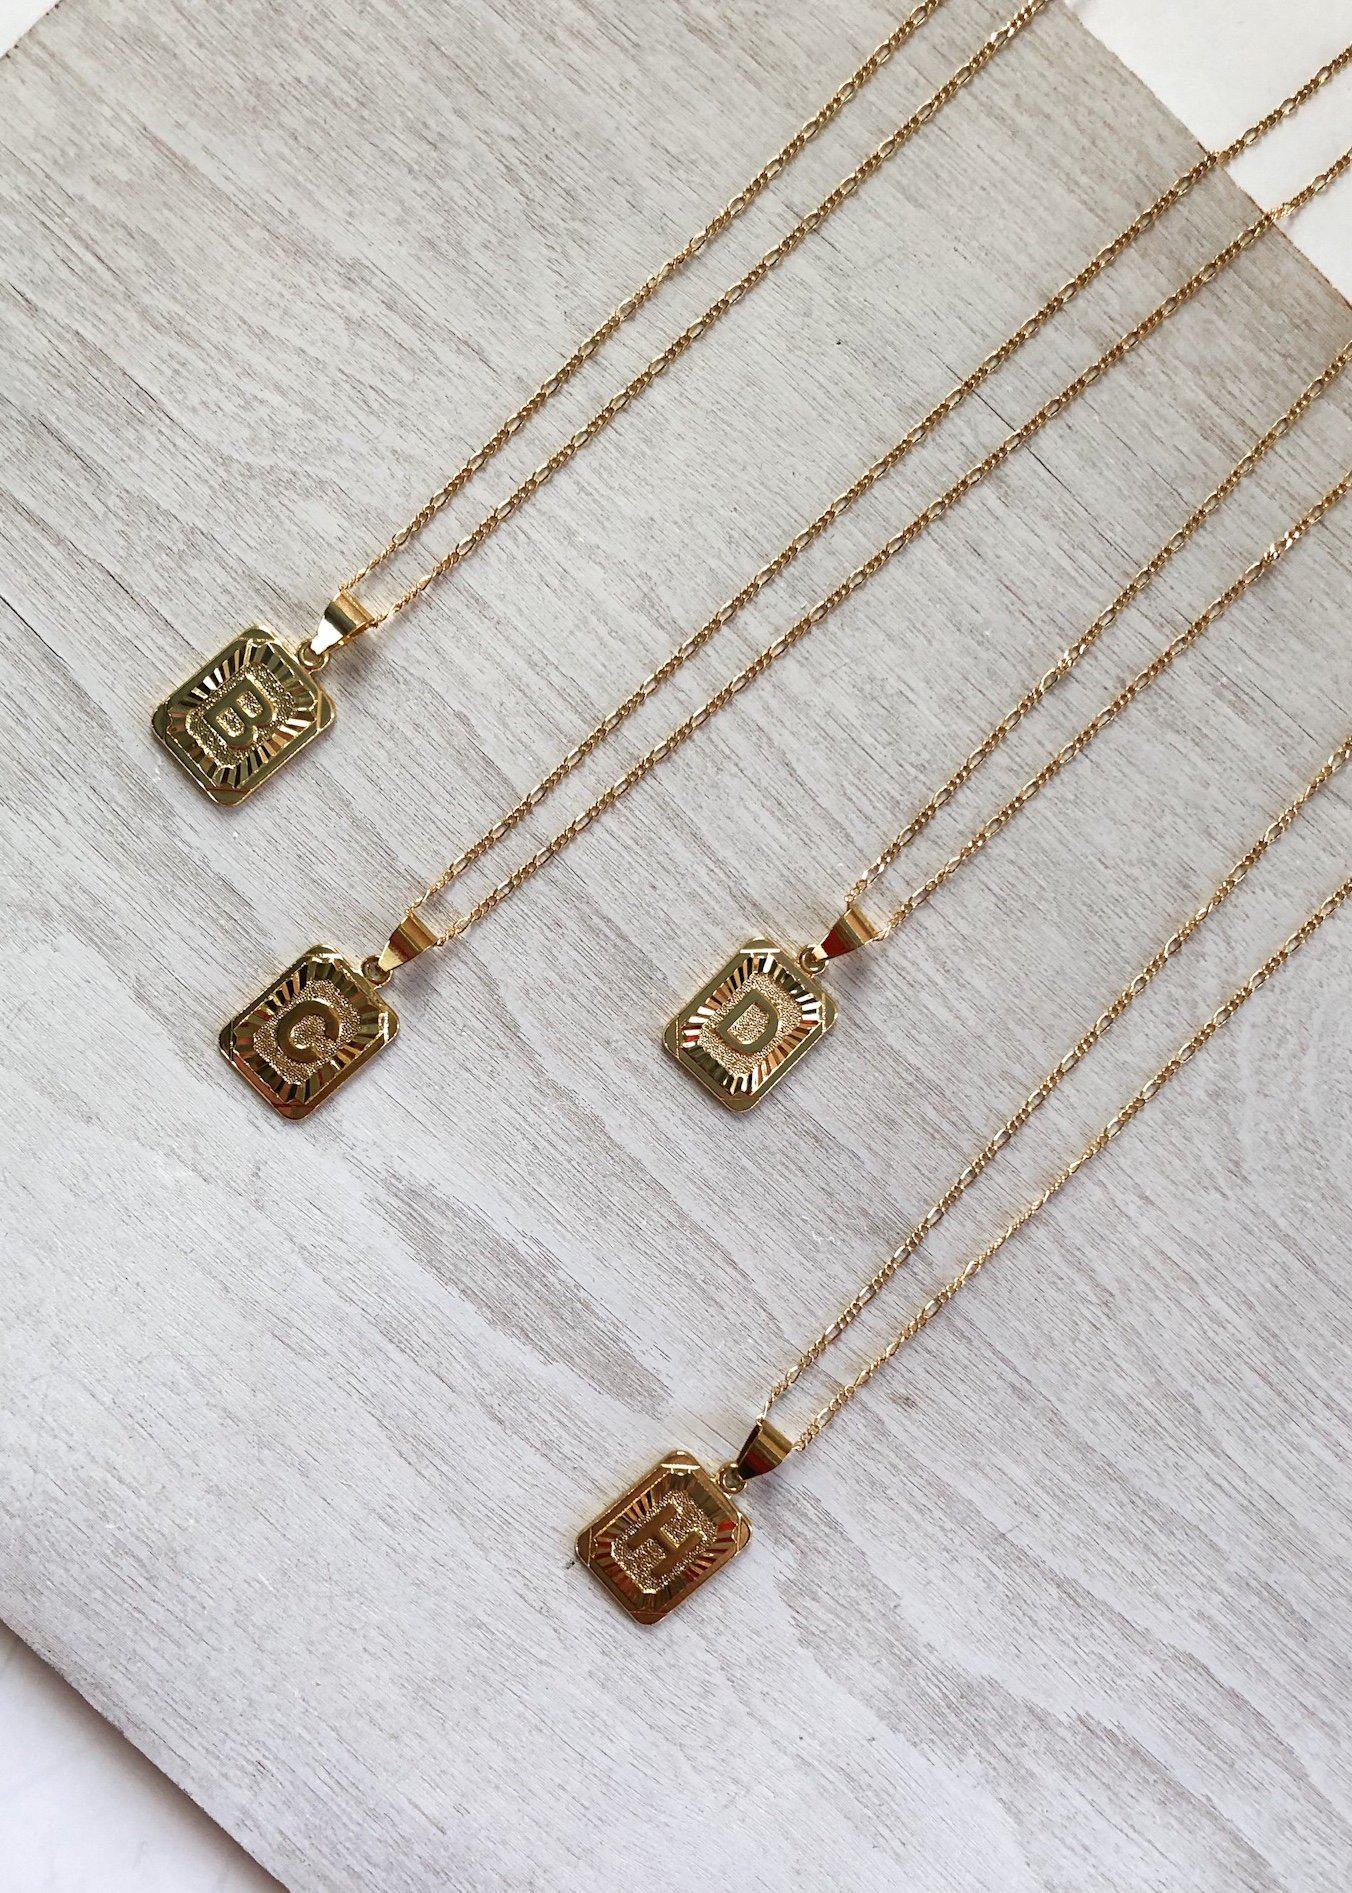 Sur Initial Necklace in Gold | Personalized Jewelry | Uncommon James